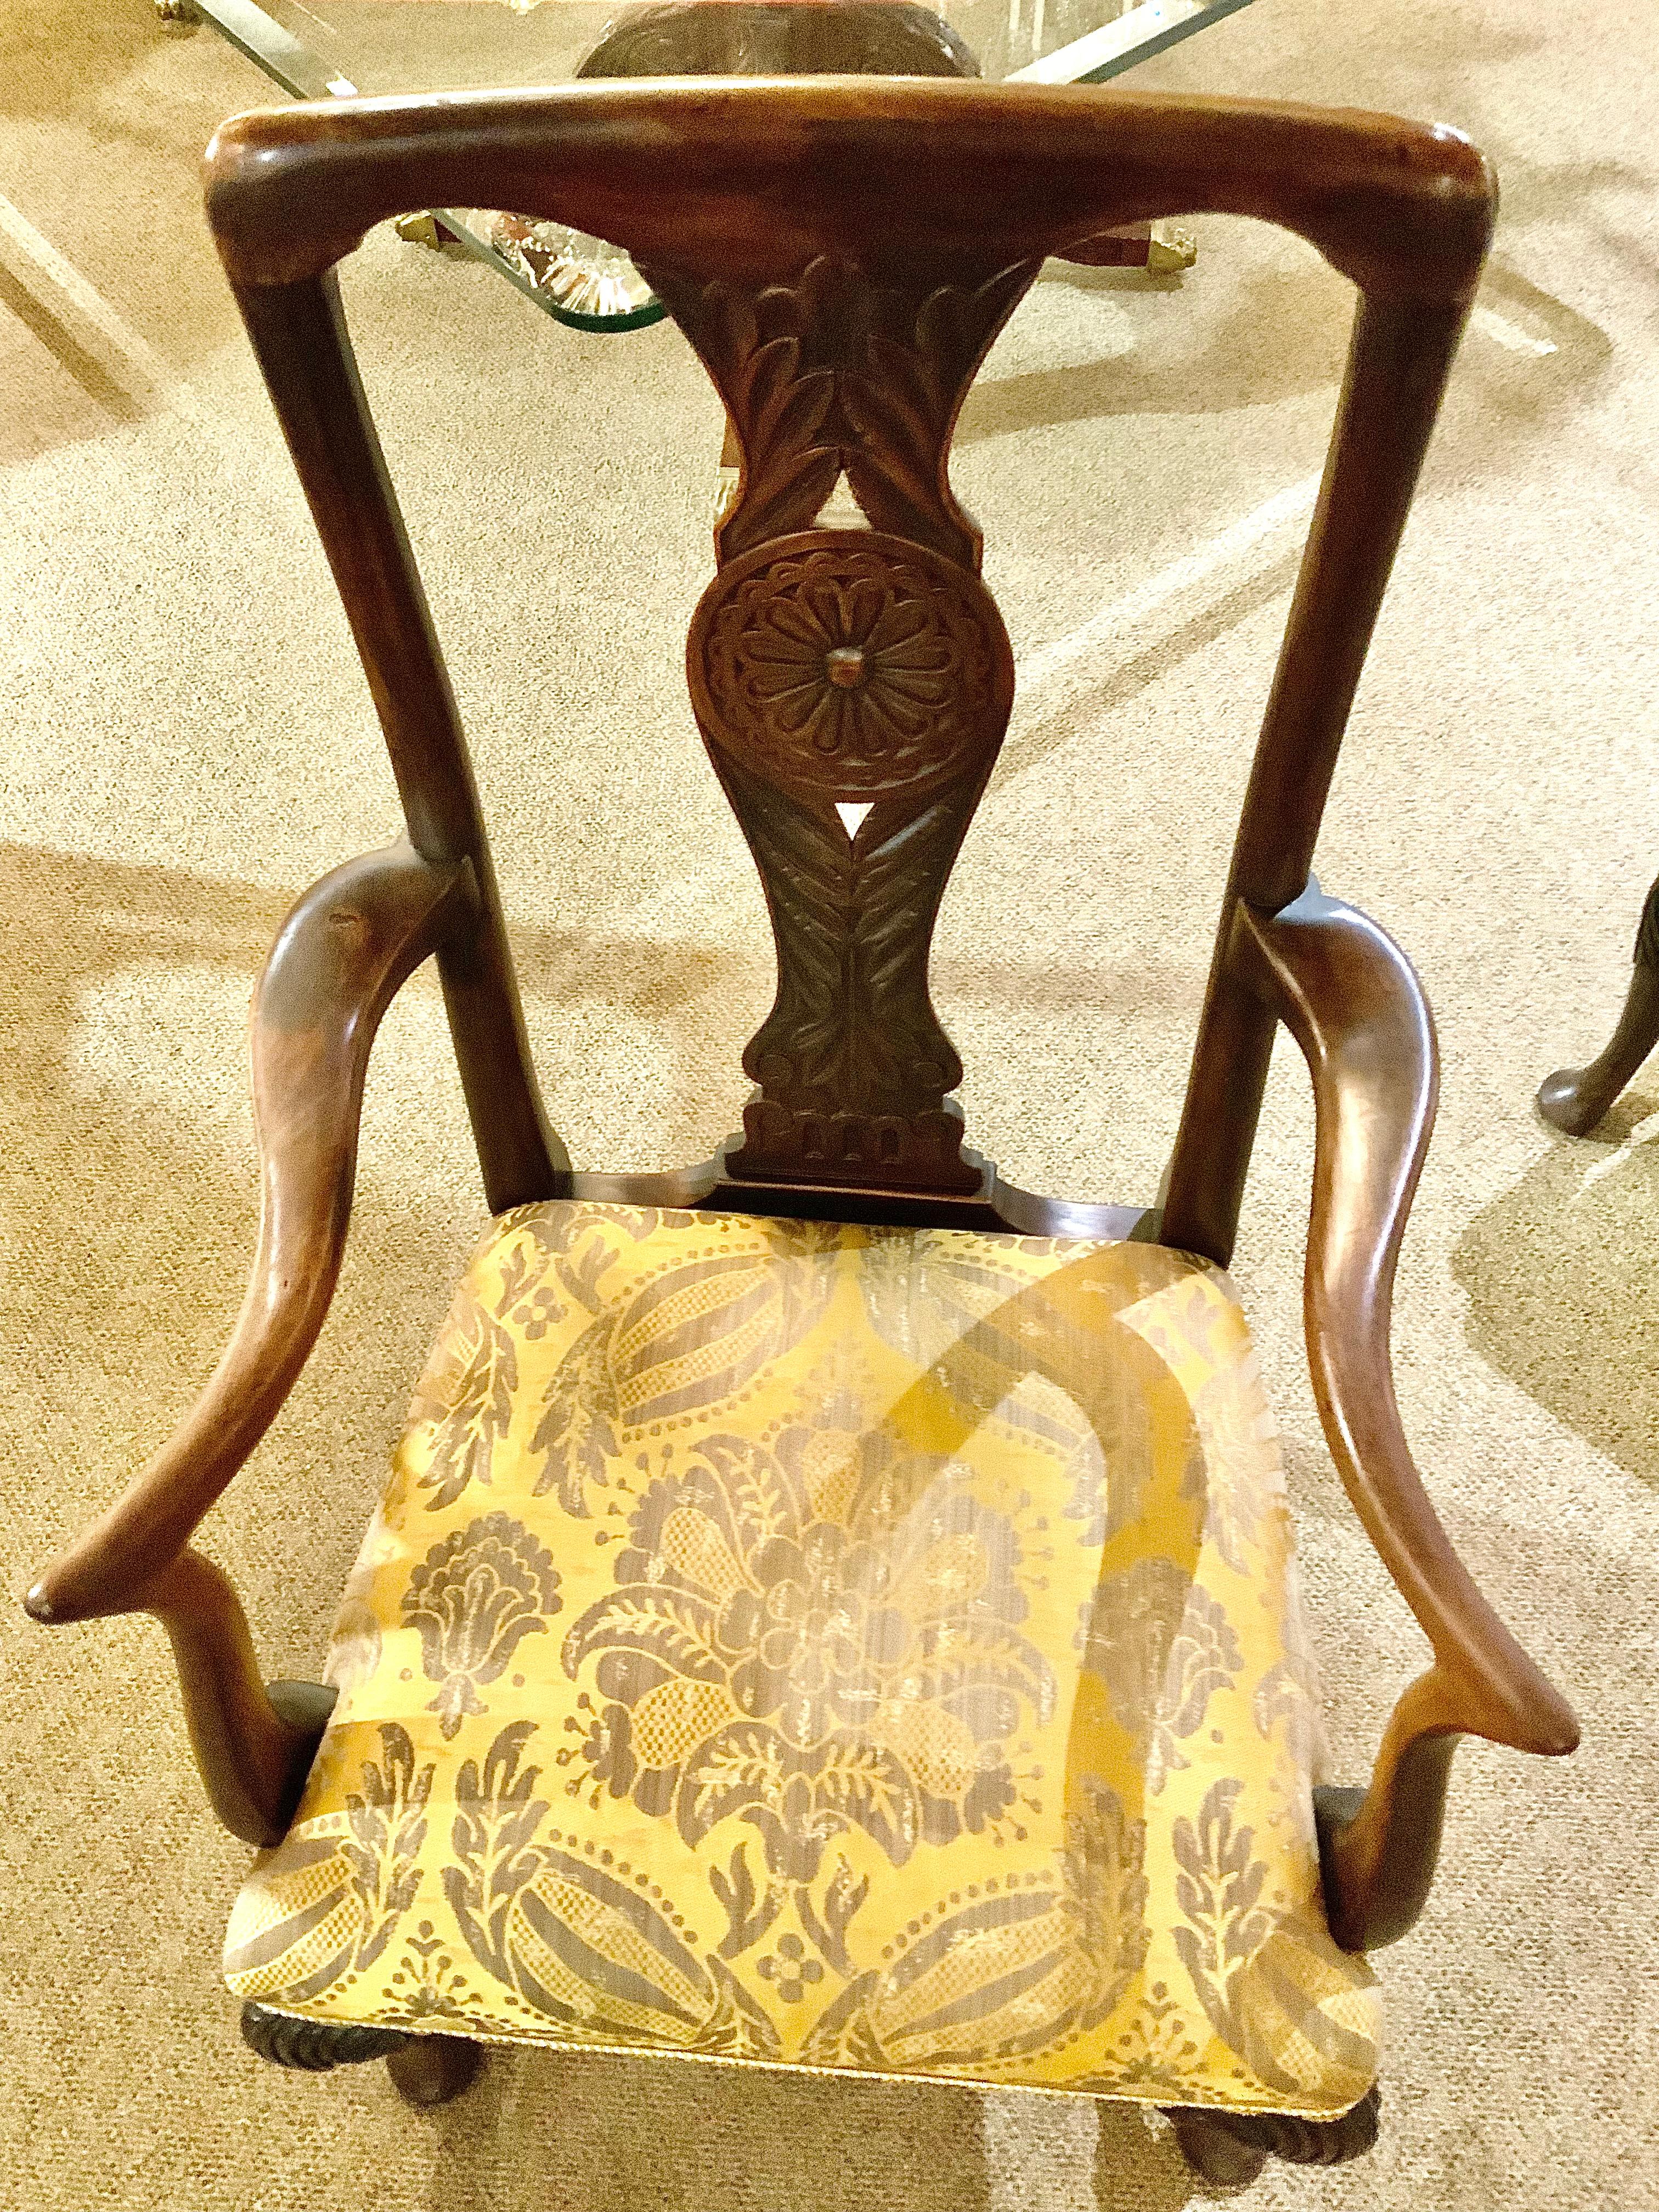 These chairs are 19th century and have a great patina in a warm walnut
Color. All are tight and without any structural problems. They are comfortable 
And have a well padded seat with exceptional silk upholstery. No spots
Or discoloration. The